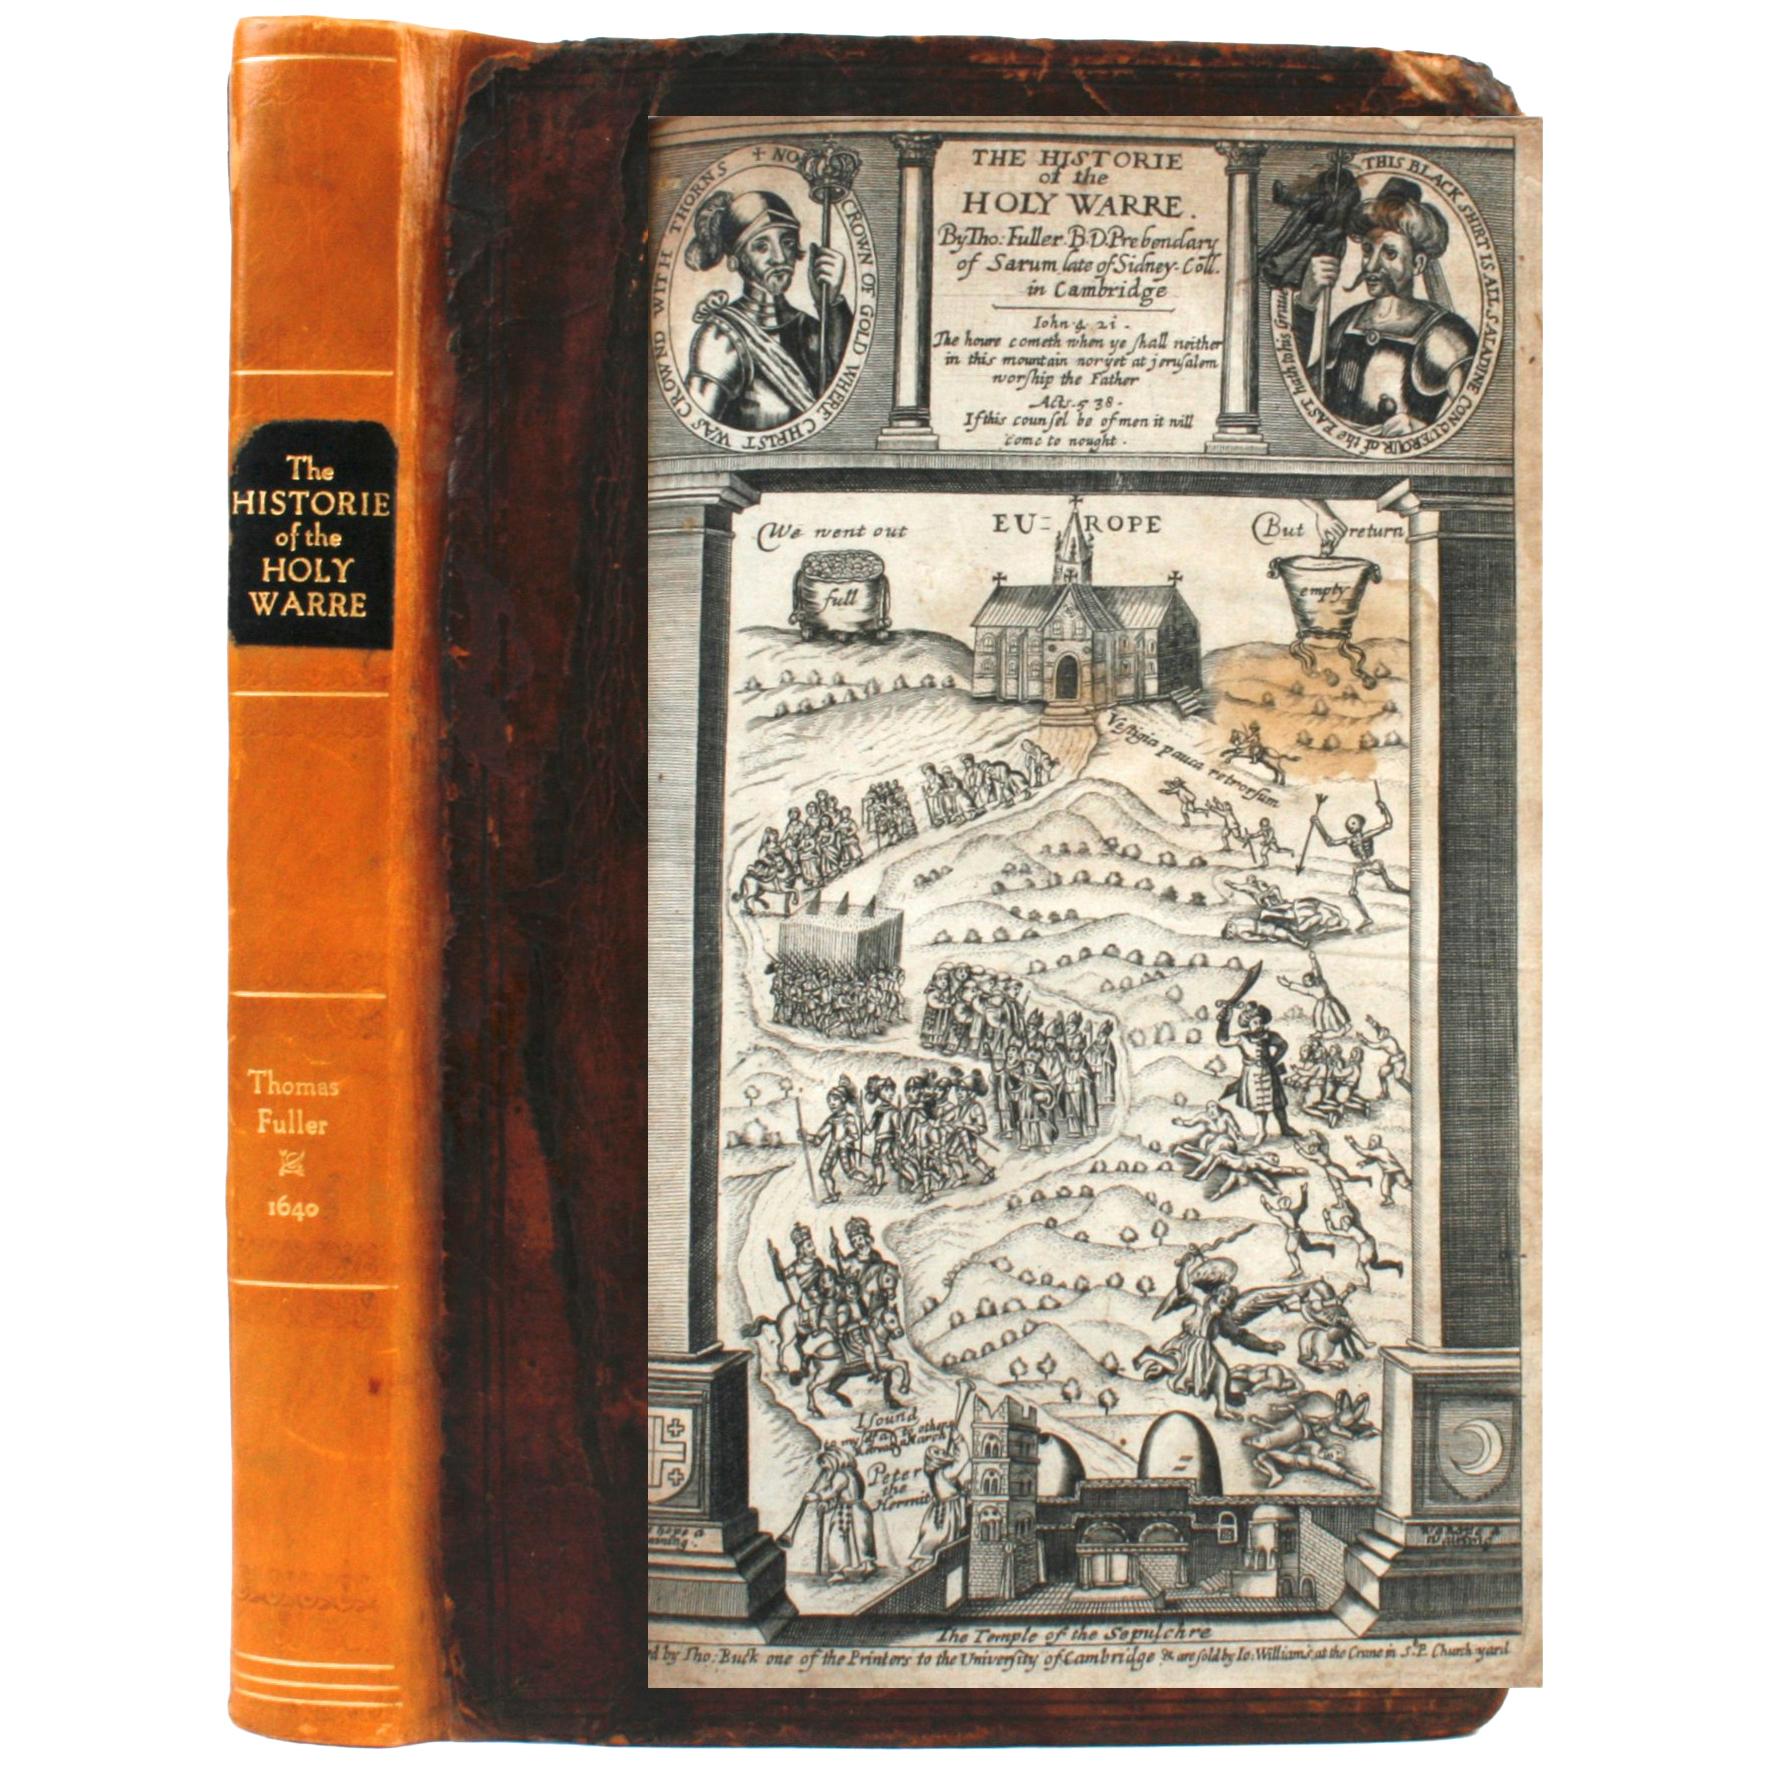 Historie of the Holy Warre by Thomas Fuller, Second Edition, circa 1640